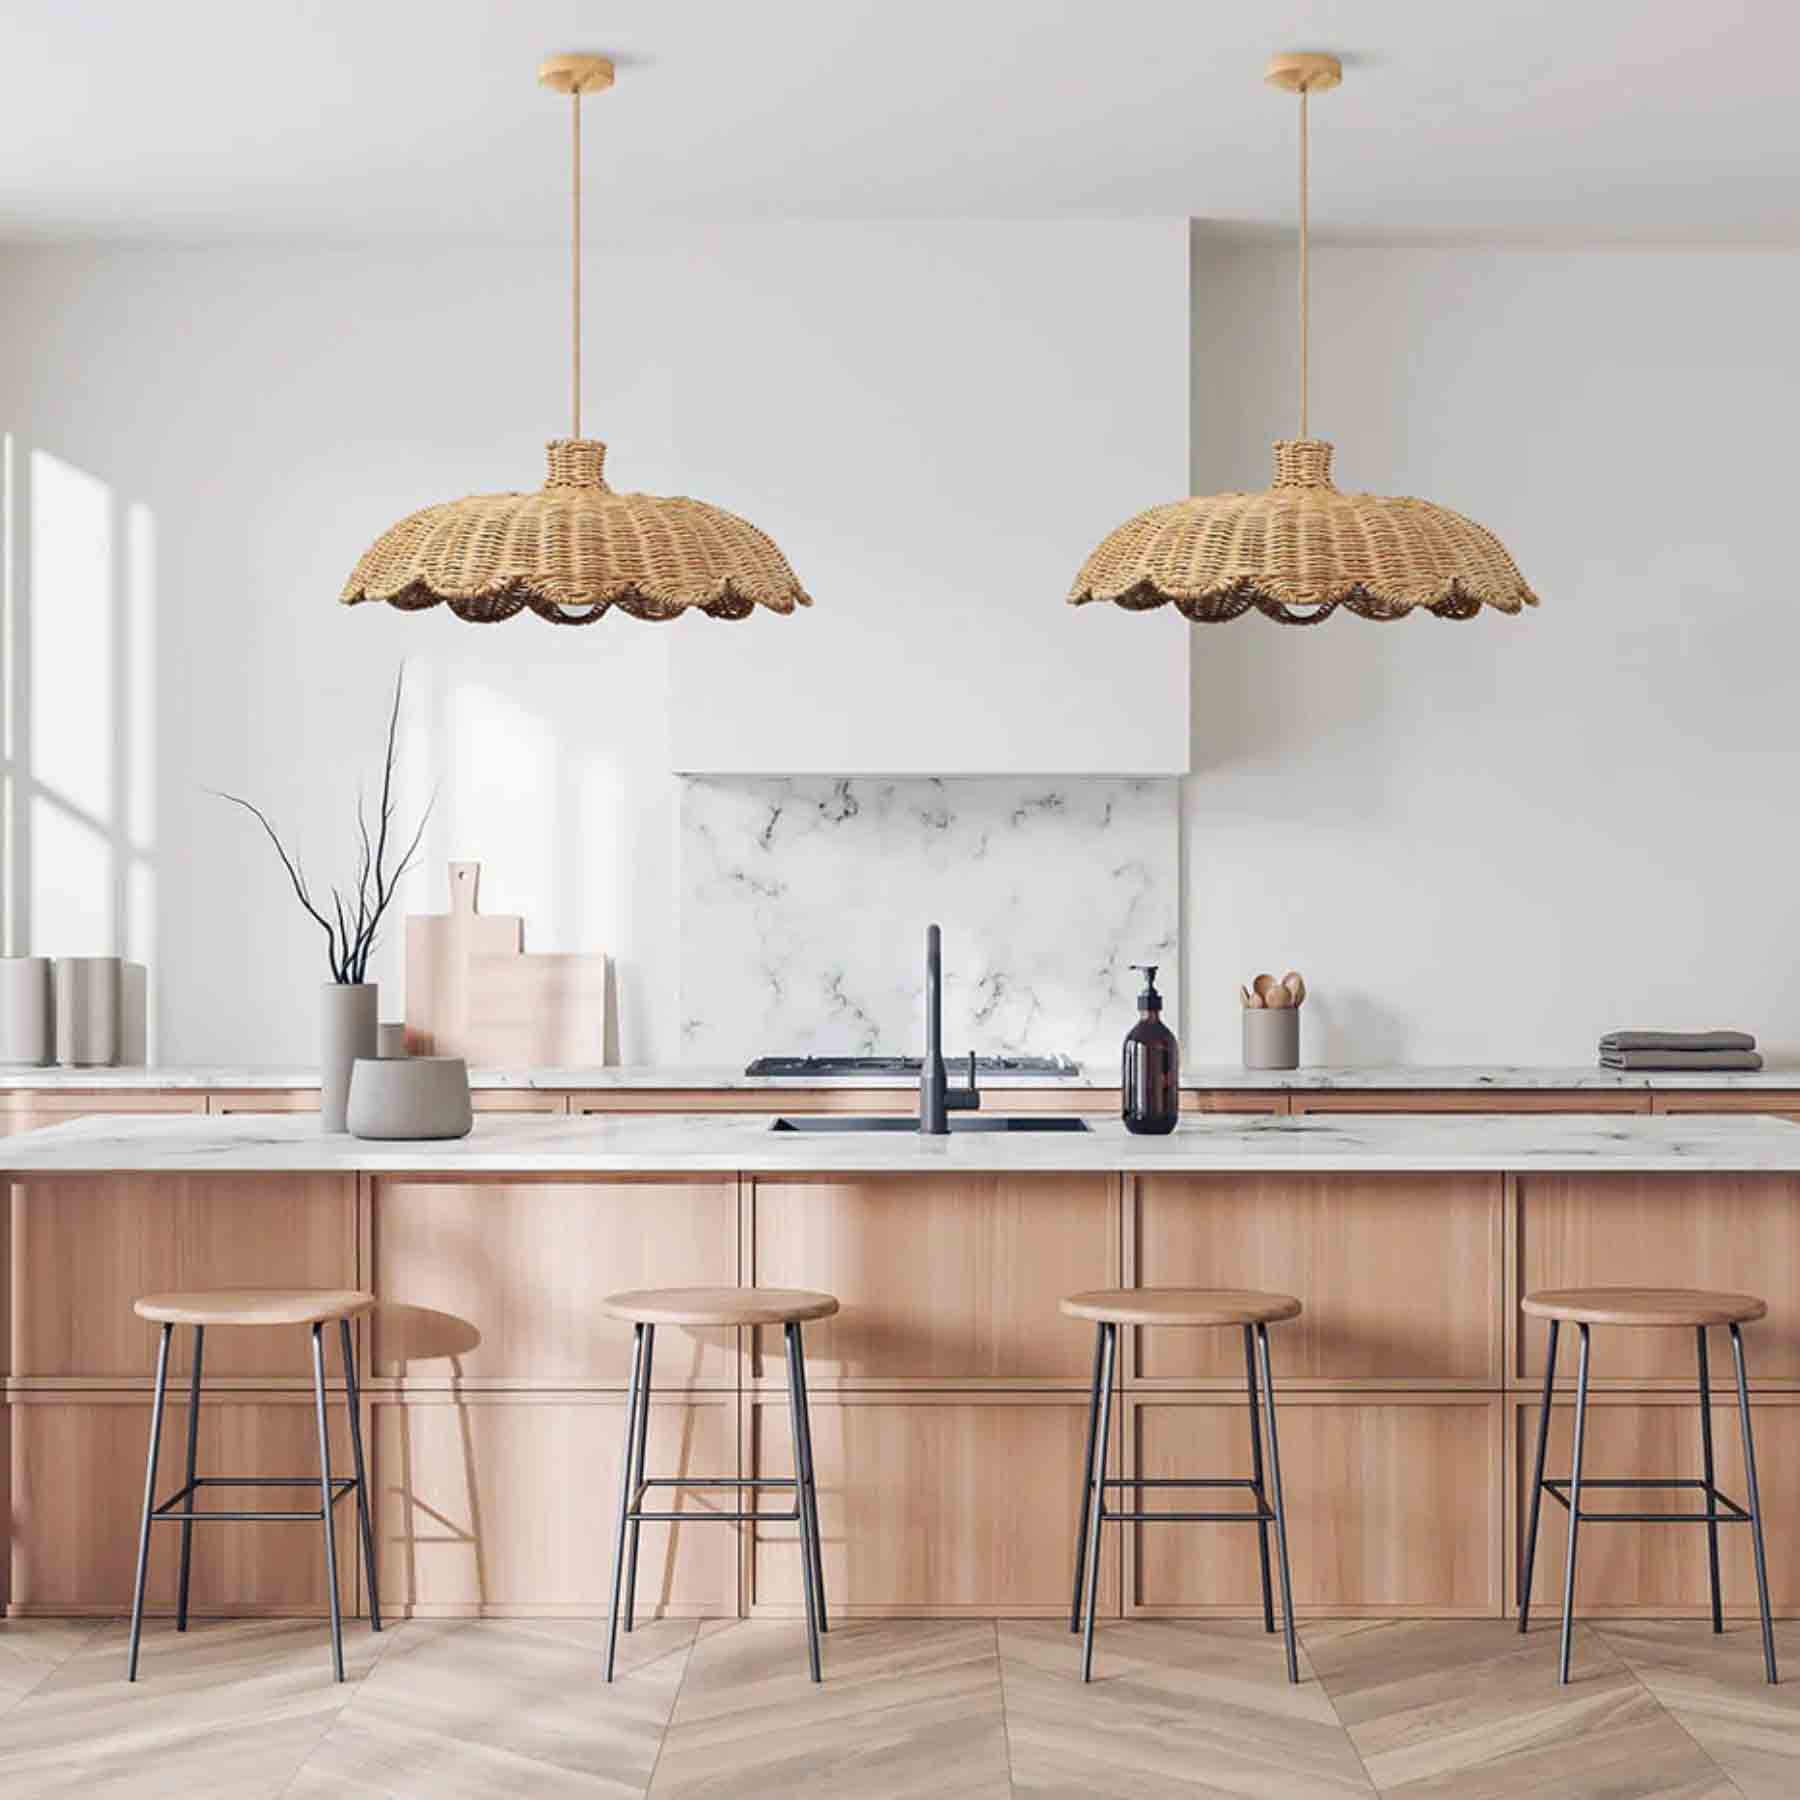 aurelia not only provides focused lighting but also serves as a perfect centerpiece elevating the kitchen into a whimsical space